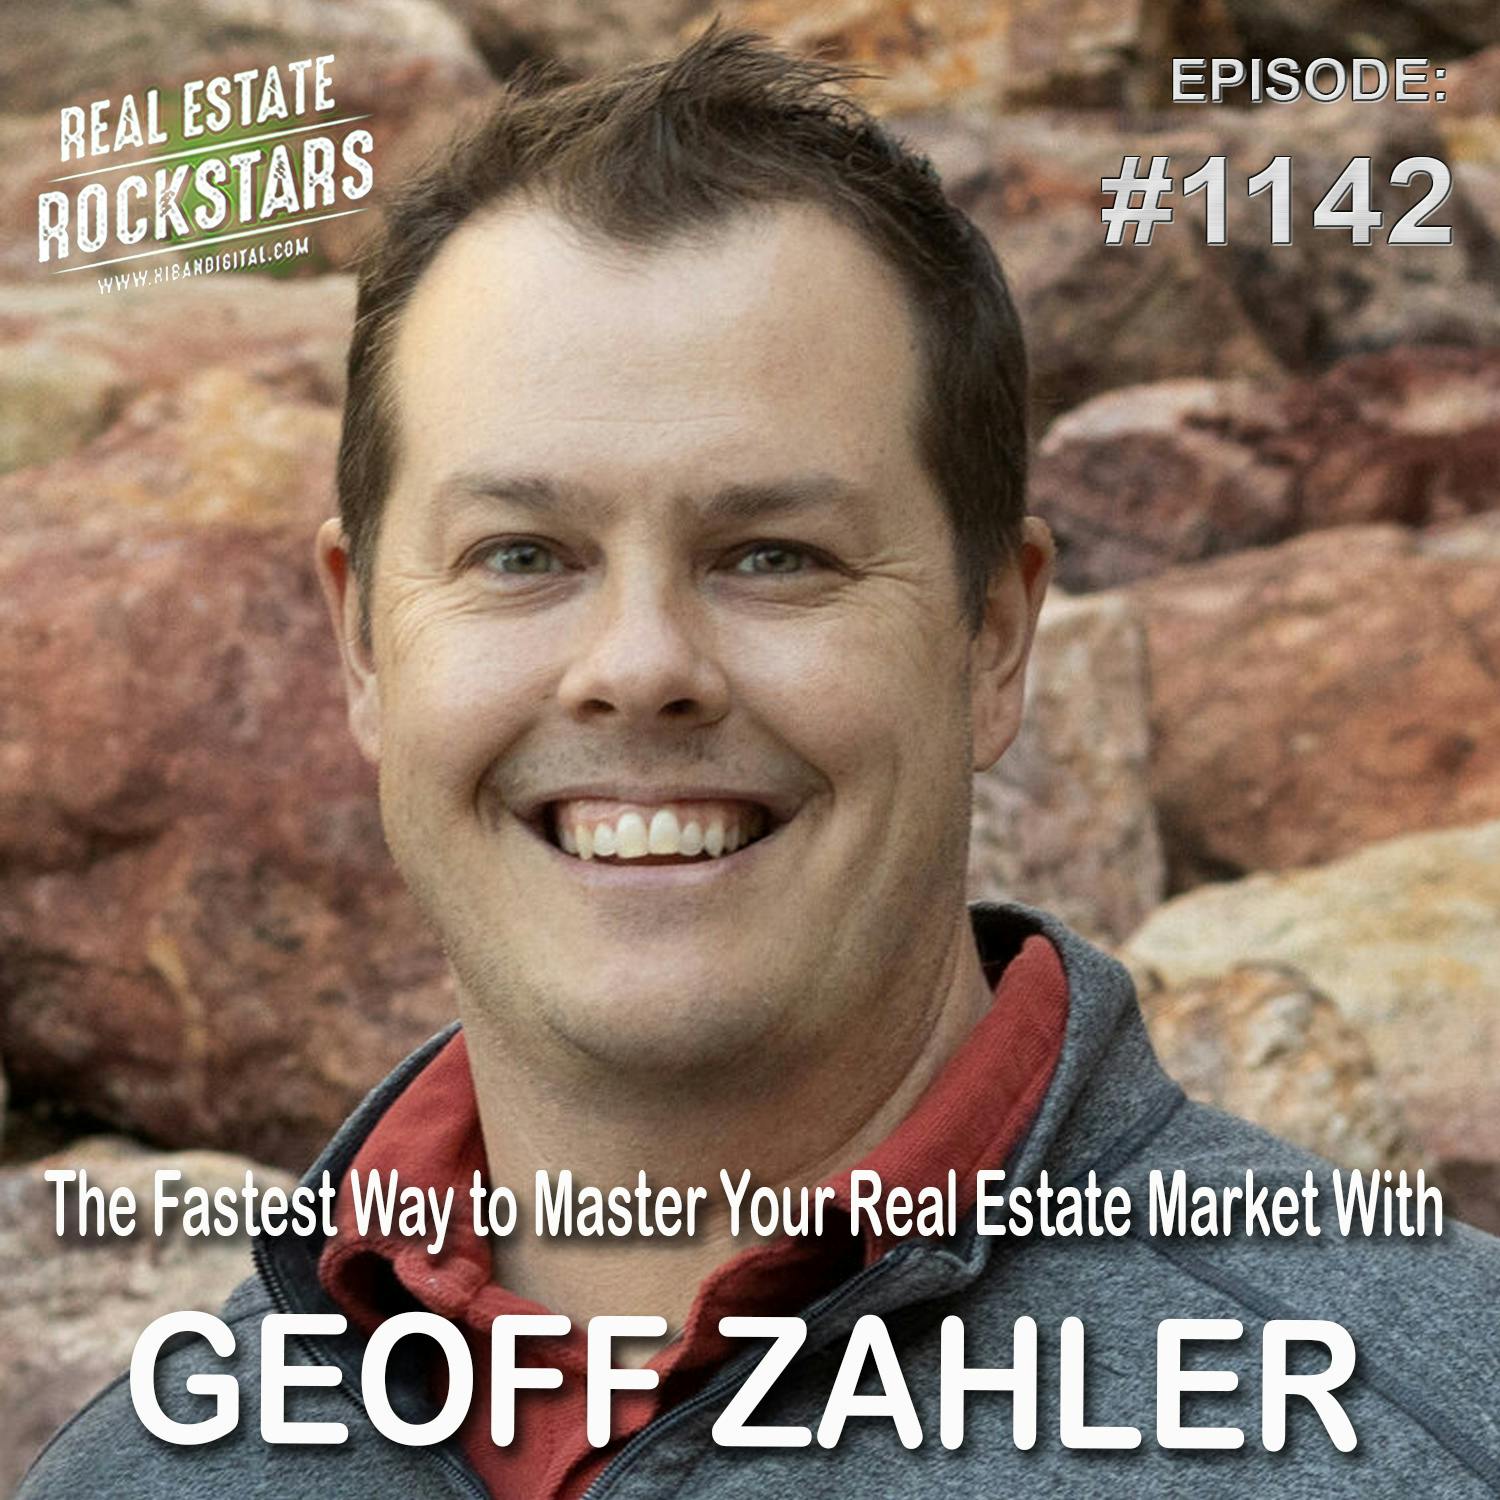 1142: The Fastest Way to Master Your Real Estate Market With Geoff Zahler